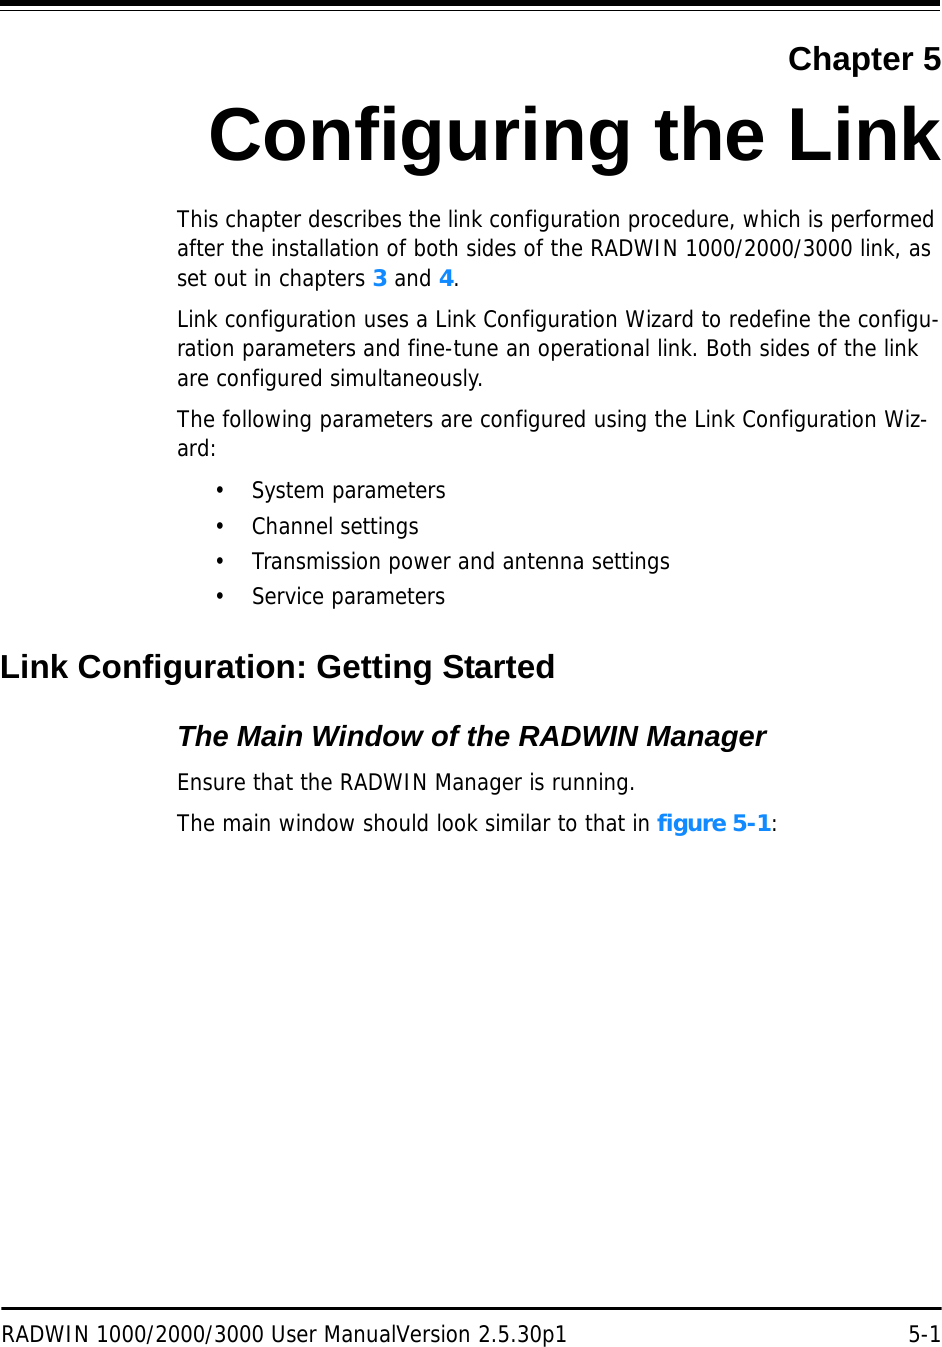 RADWIN 1000/2000/3000 User ManualVersion 2.5.30p1 5-1Chapter 5Configuring the LinkThis chapter describes the link configuration procedure, which is performed after the installation of both sides of the RADWIN 1000/2000/3000 link, as set out in chapters 3 and 4.Link configuration uses a Link Configuration Wizard to redefine the configu-ration parameters and fine-tune an operational link. Both sides of the link are configured simultaneously.The following parameters are configured using the Link Configuration Wiz-ard:• System parameters• Channel settings• Transmission power and antenna settings•Service parametersLink Configuration: Getting StartedThe Main Window of the RADWIN ManagerEnsure that the RADWIN Manager is running.The main window should look similar to that in figure 5-1: